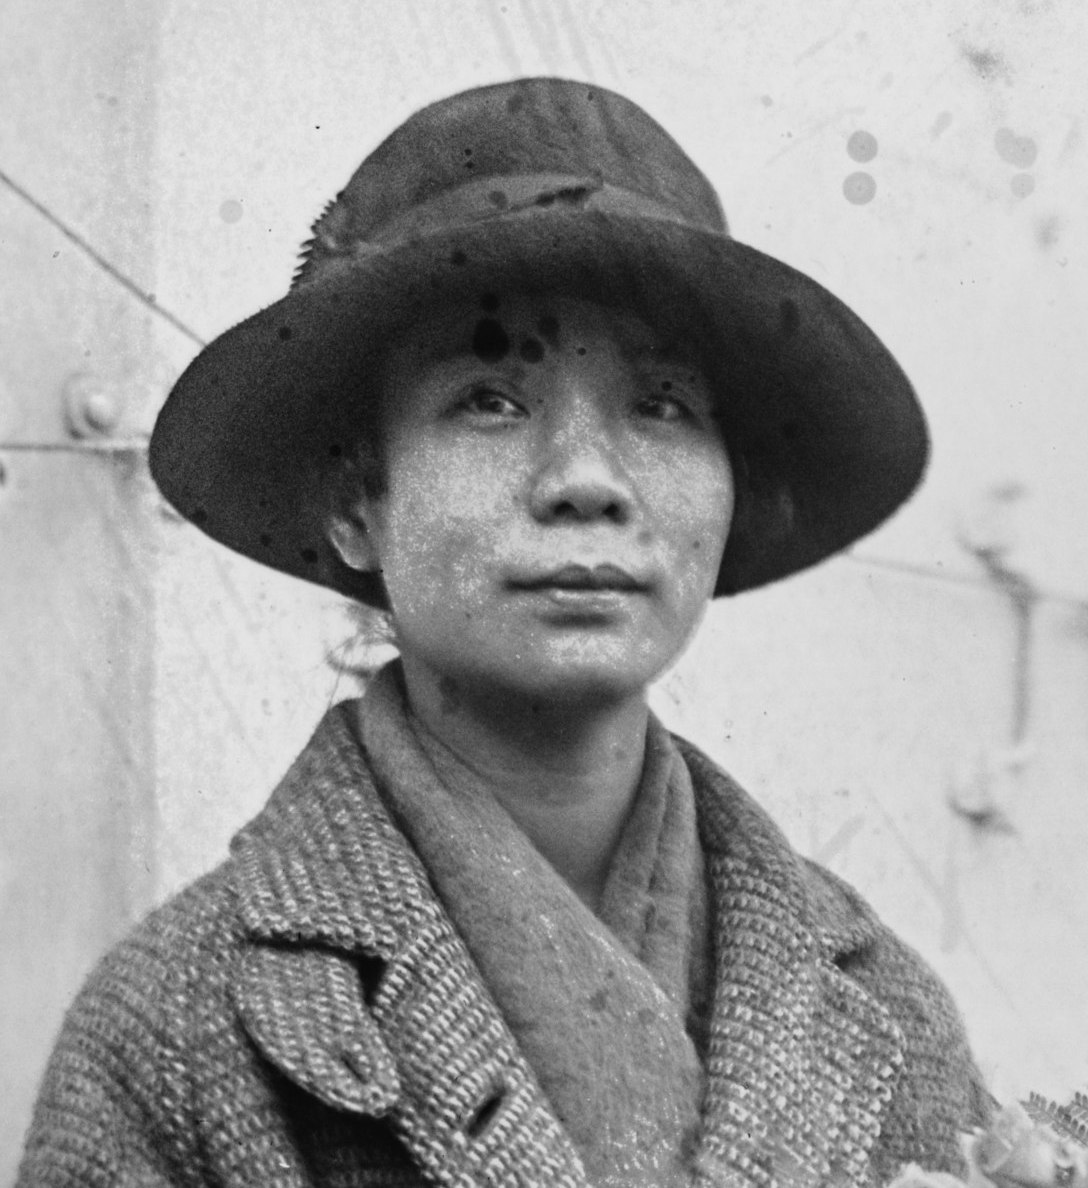 Mabel Ping-Hua Lee was a Chinese immigrant who participated in the women’s suffrage movement. #AAPIHistoryMonth #AAPIHeritageMonth 

Learn more by visiting our exhibit on the #19thAmendment: ow.ly/Ly9u50Ru3Pa